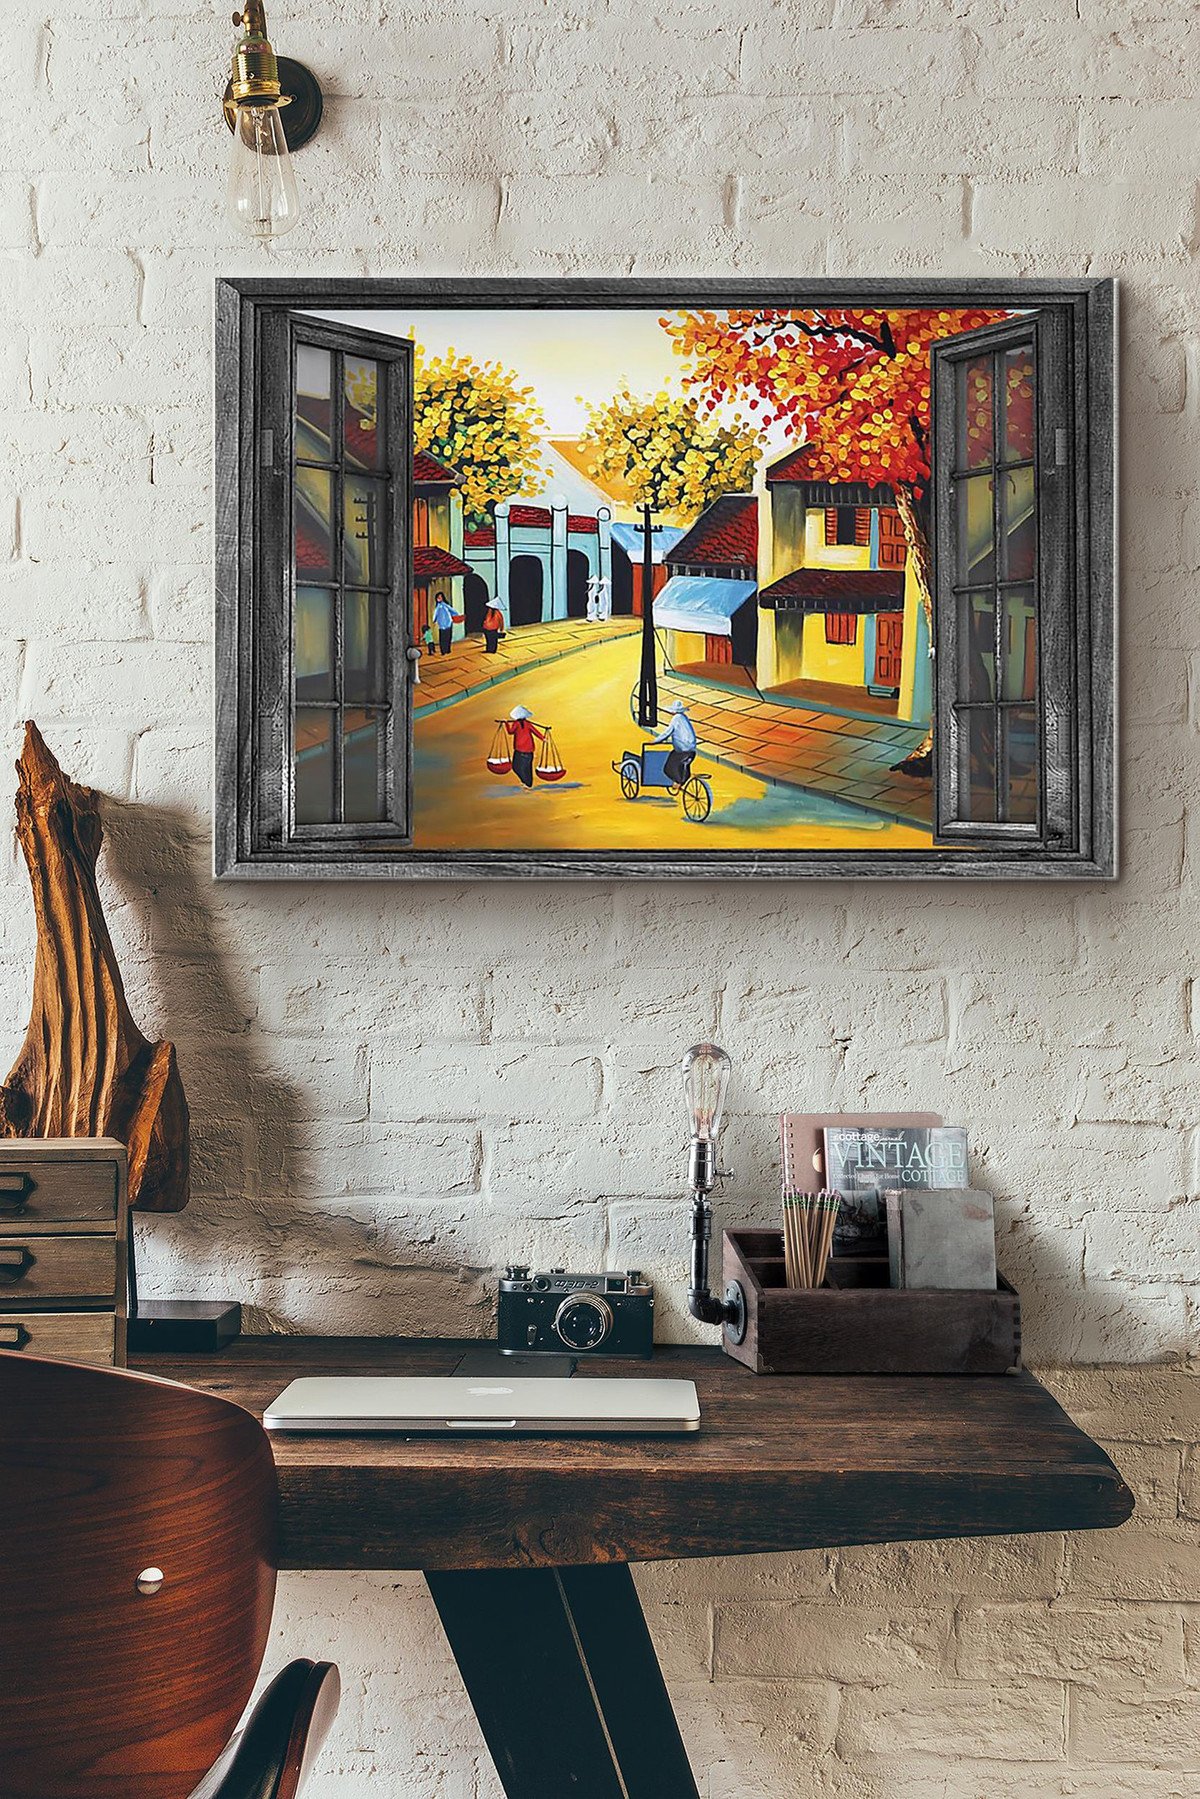 Hanoi Old Town In The Autumn Canvas Painting Ideas, Canvas Hanging Prints, Gift Idea Framed Prints, Canvas Paintings Wrapped Canvas 8x10